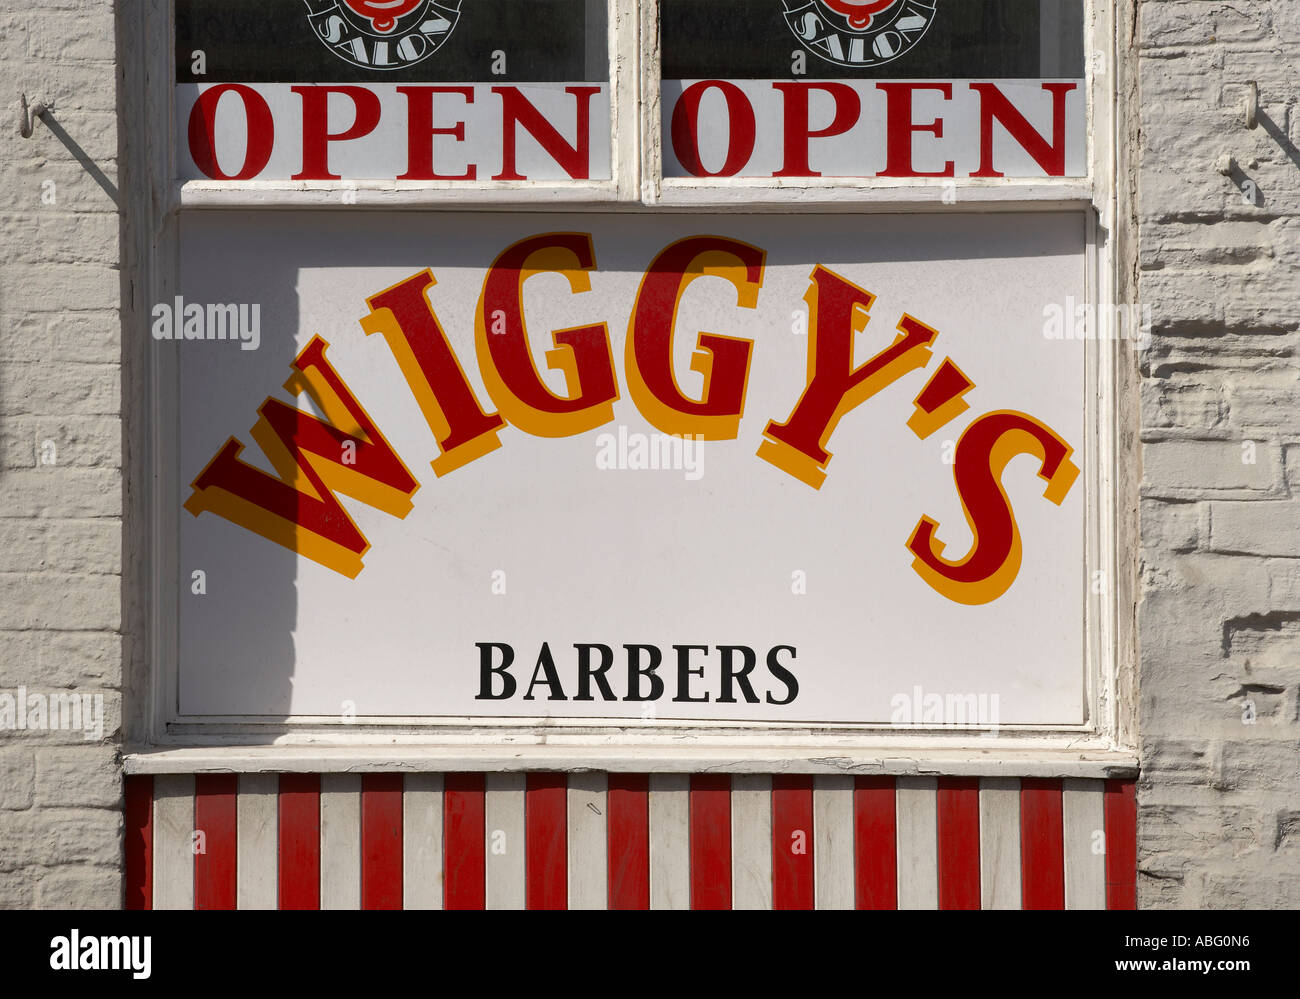 WIGGYS BARBERS SHOP FRONT WINDOW AND SIGN Stock Photo